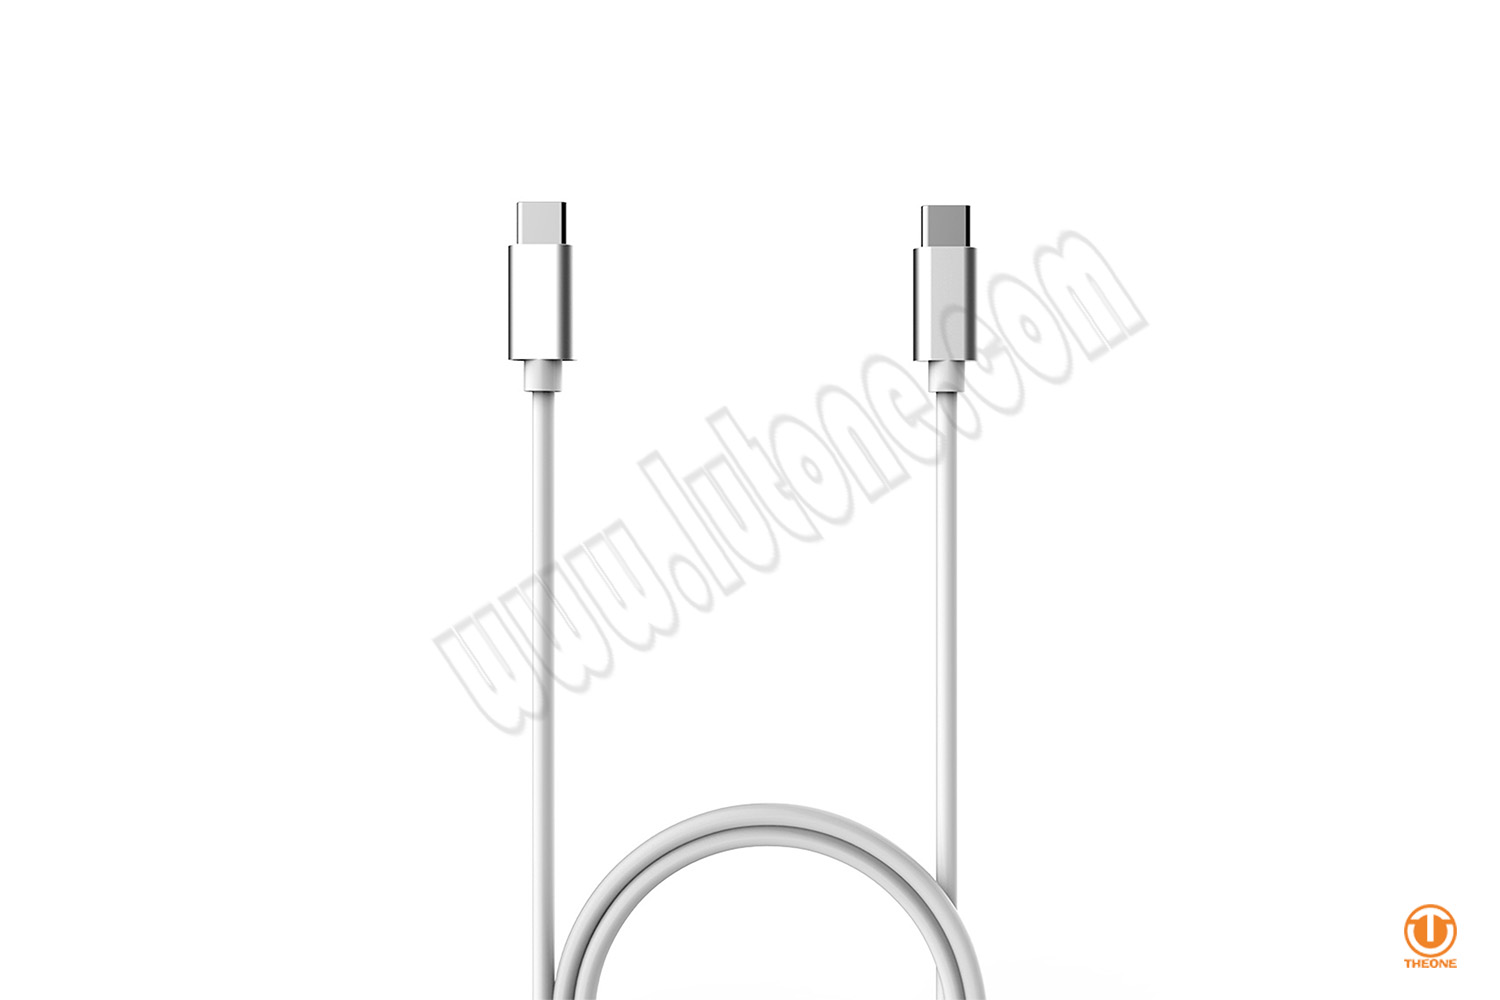 usb-c data cable